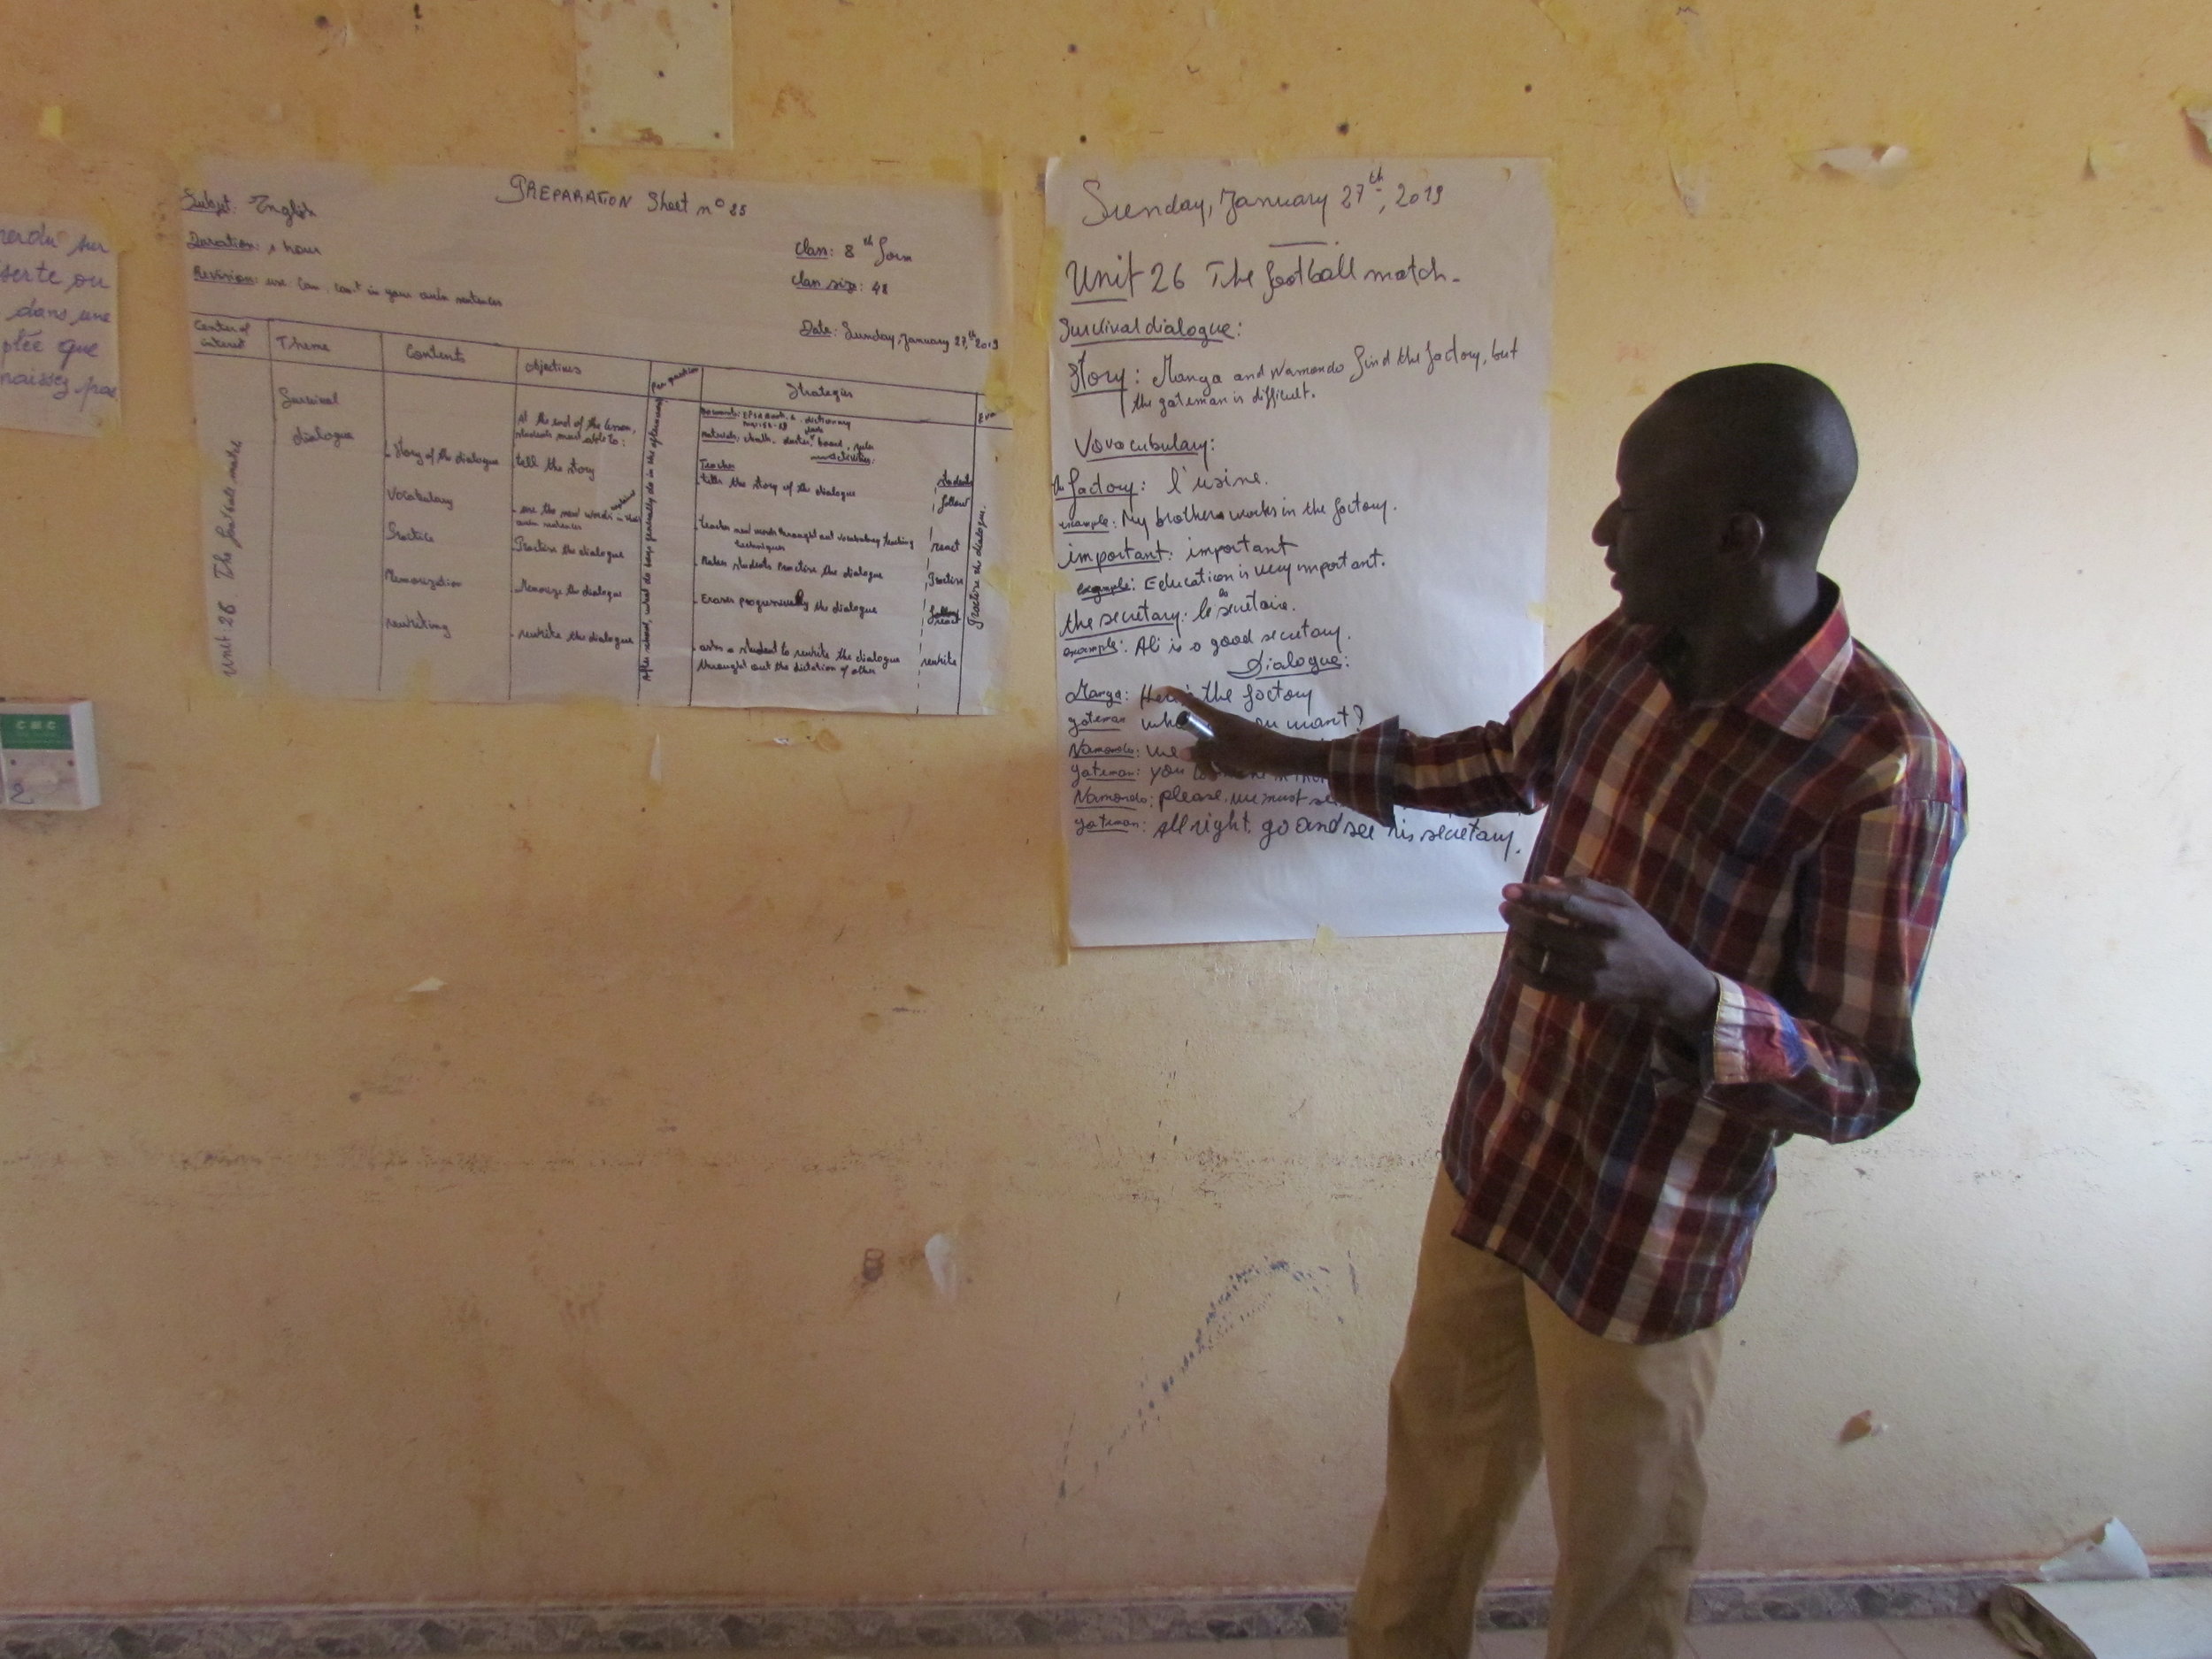 An English teacher presents his lesson using a story about soccer to engage learners with the material.